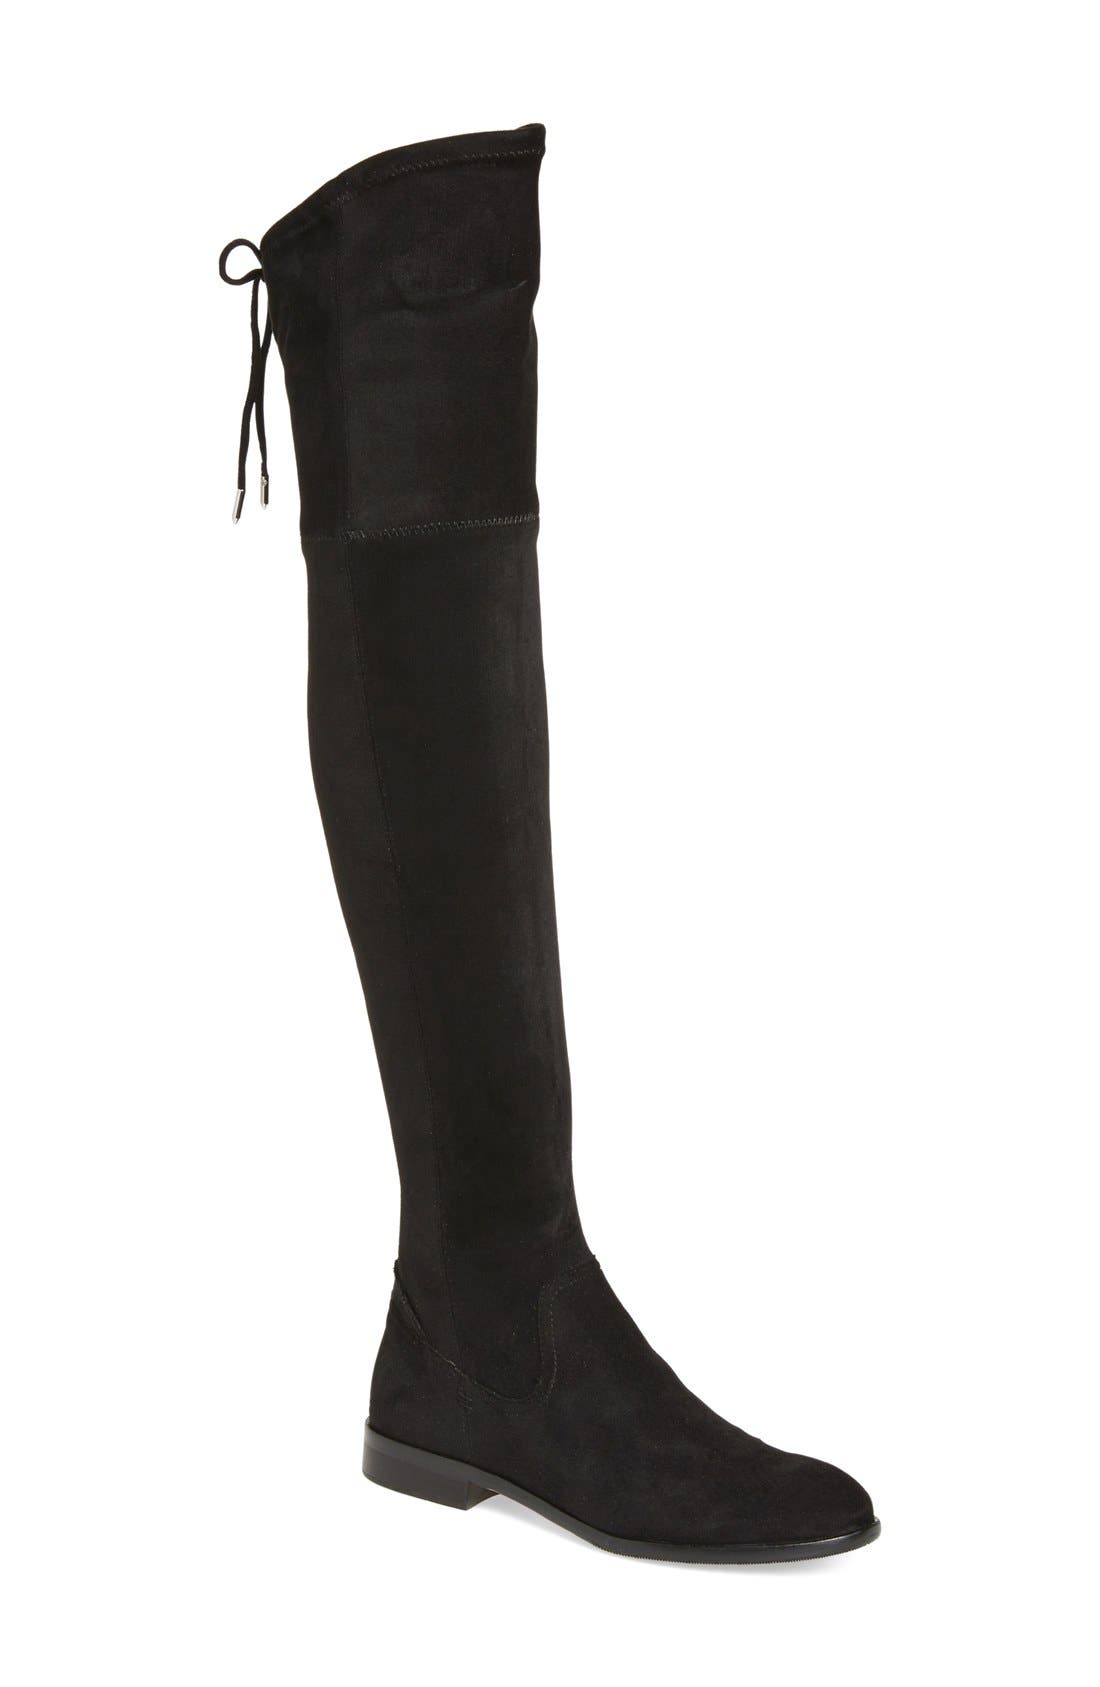 Dolce Vita 'Neely' Over the Knee Boot 